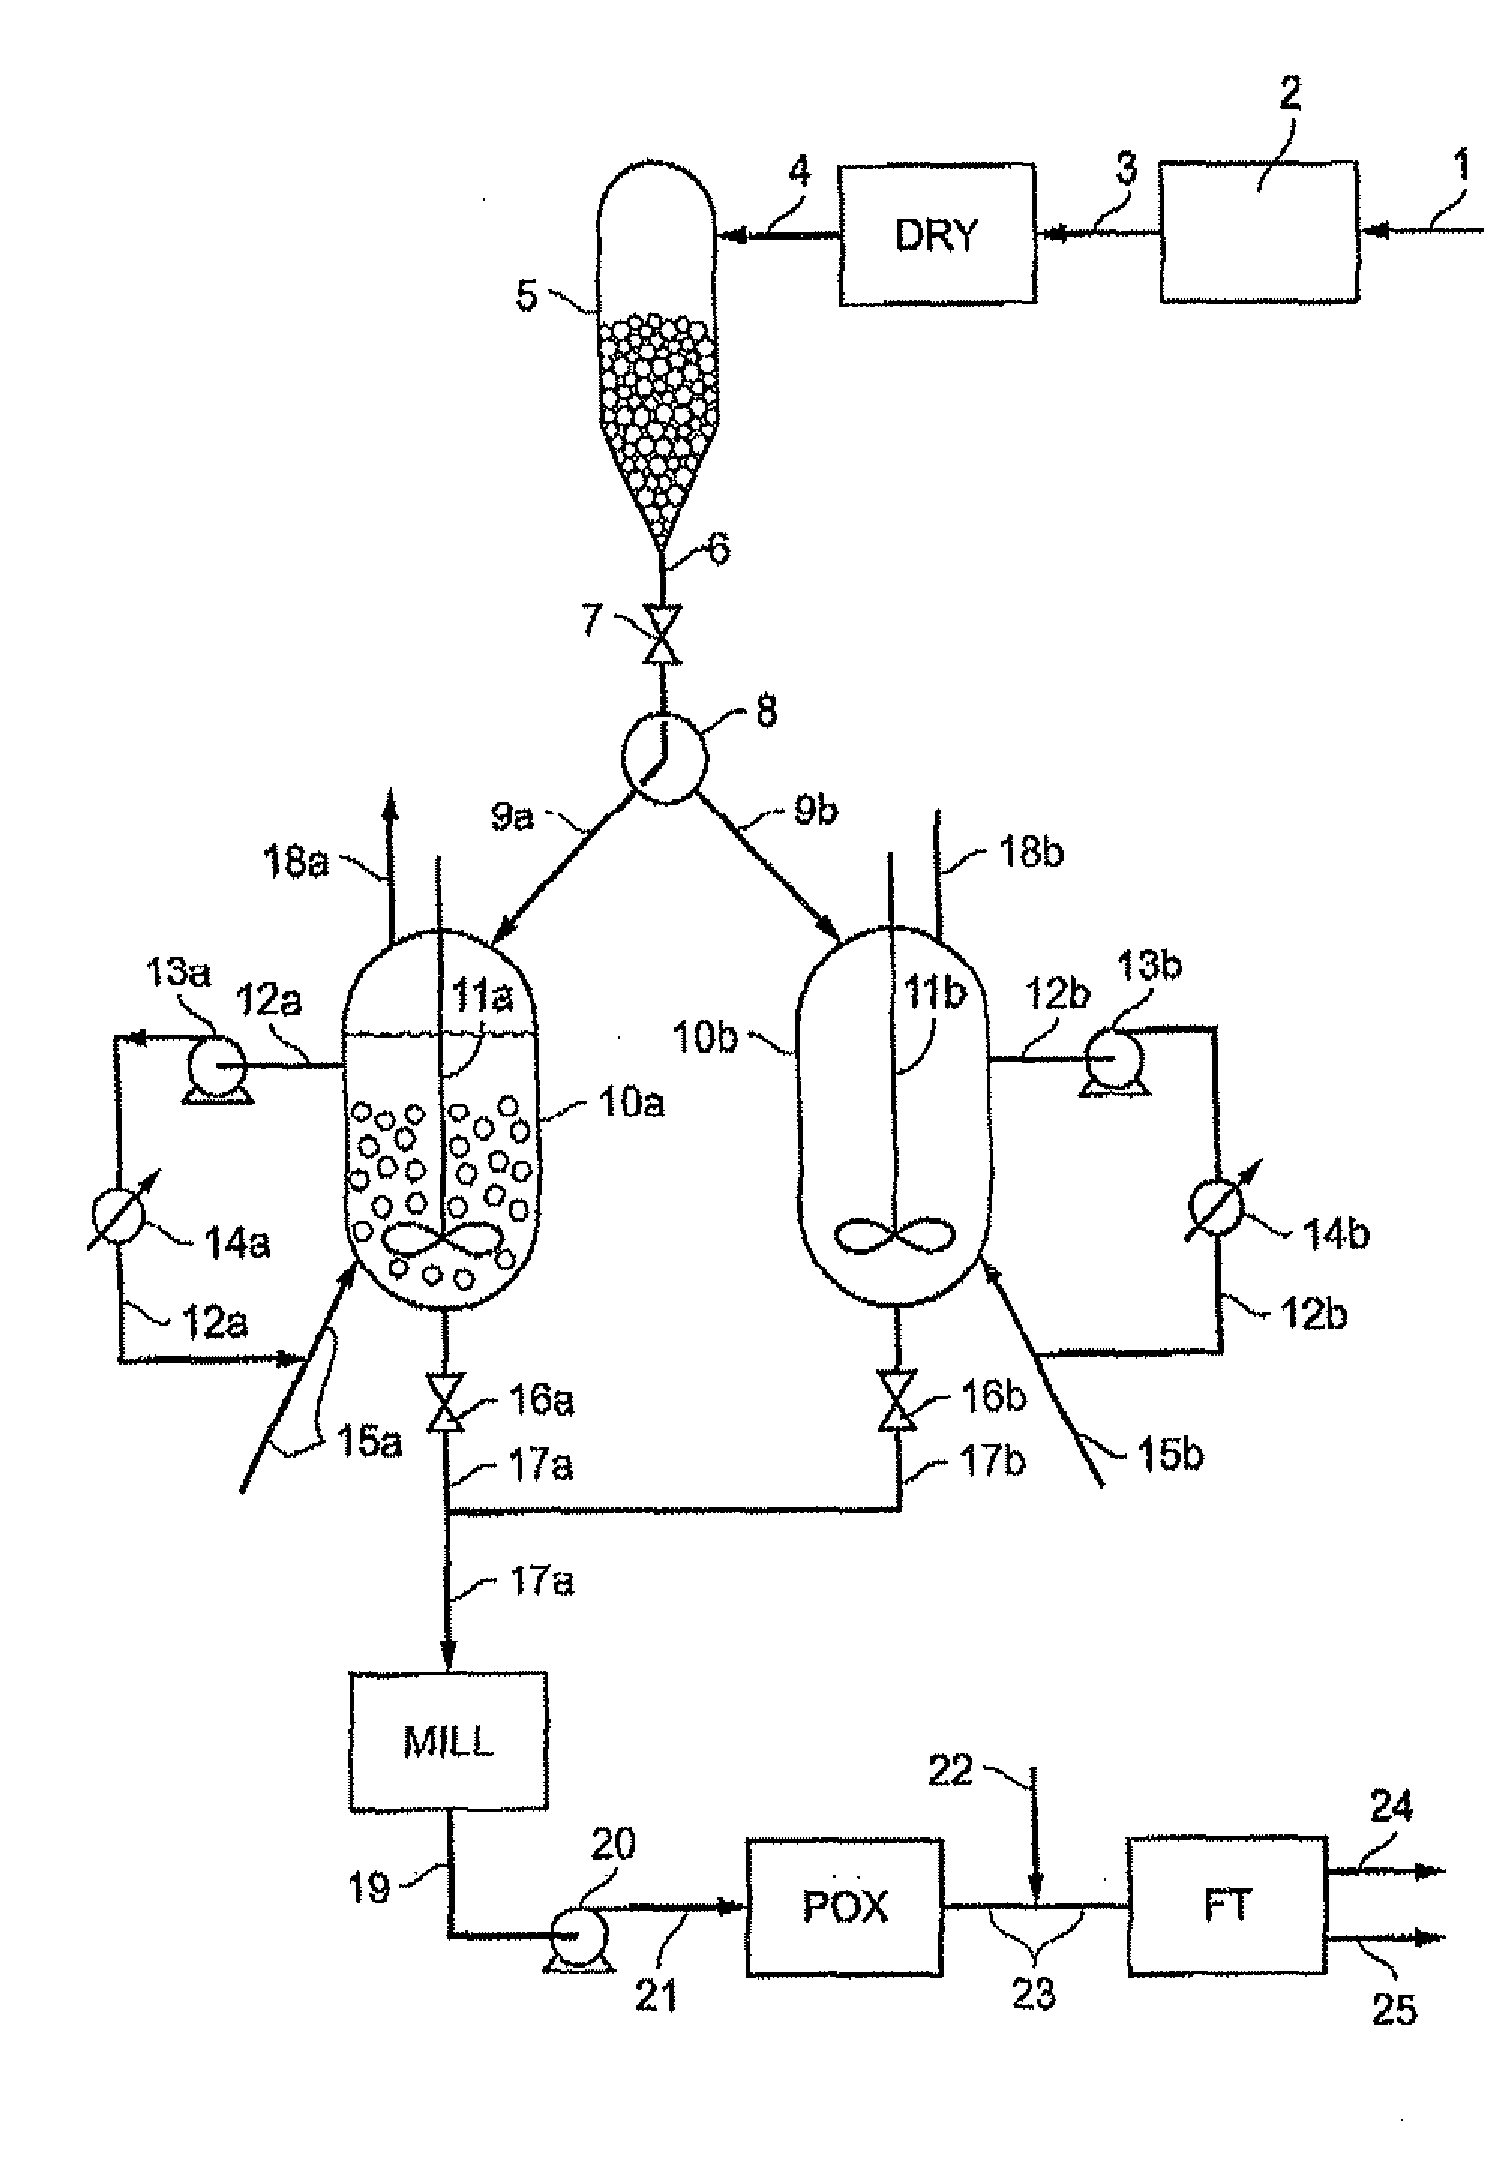 Process for converting biomass to produce synthesis gas